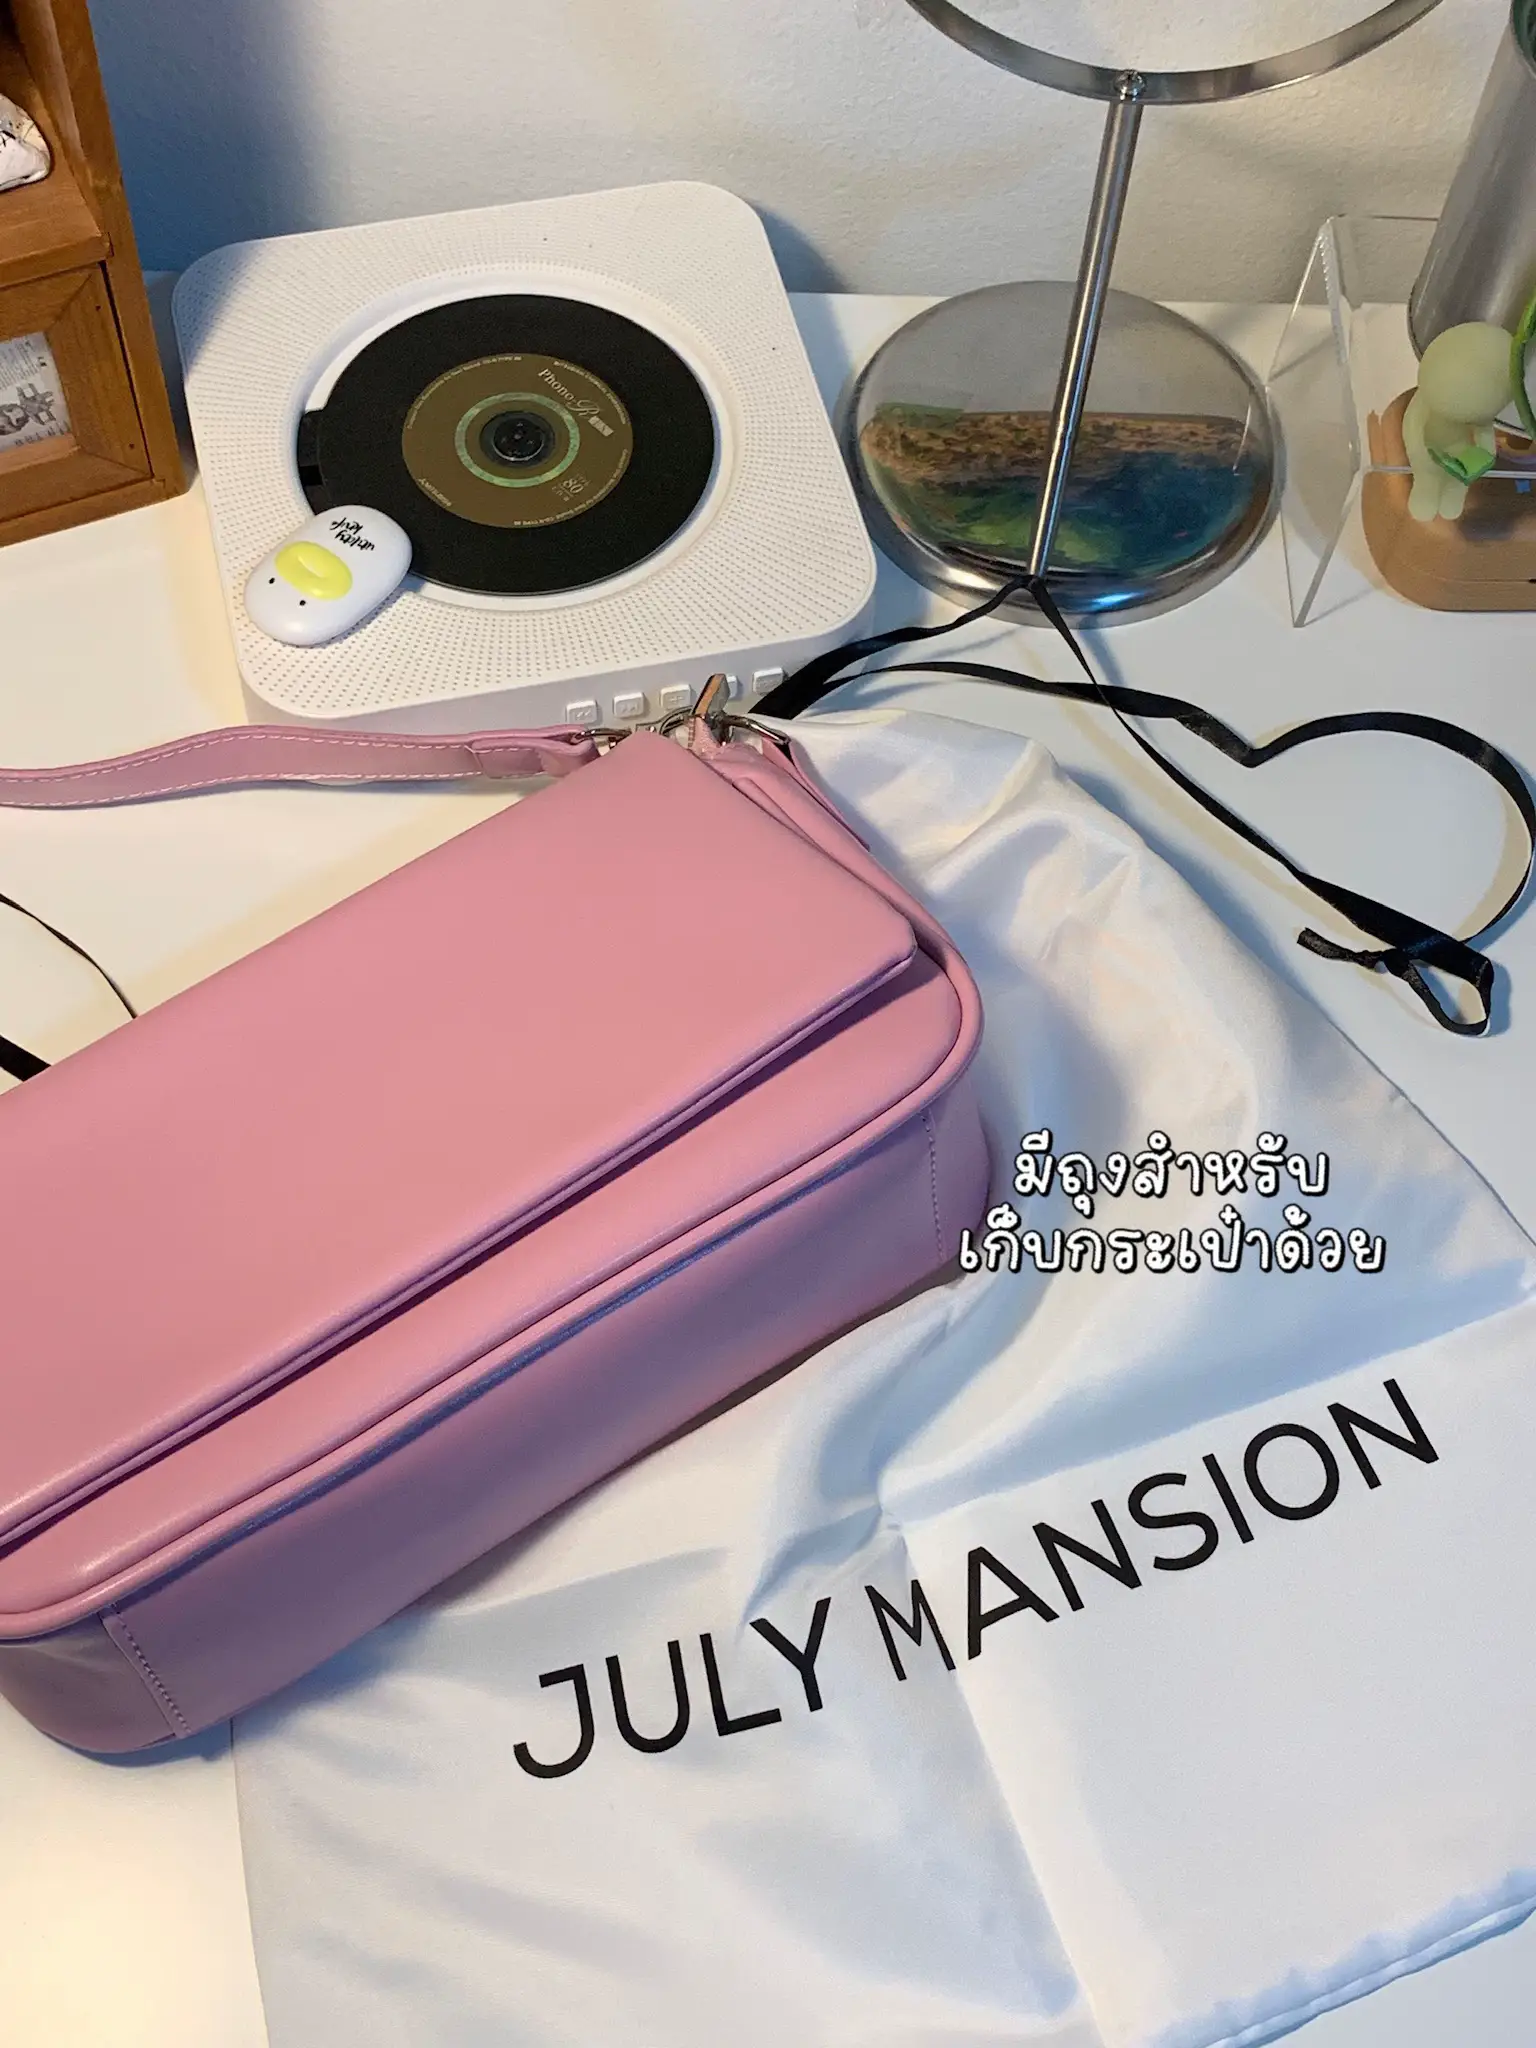 Jnd.collections - Coach Cassie is the perfect dupe for LV